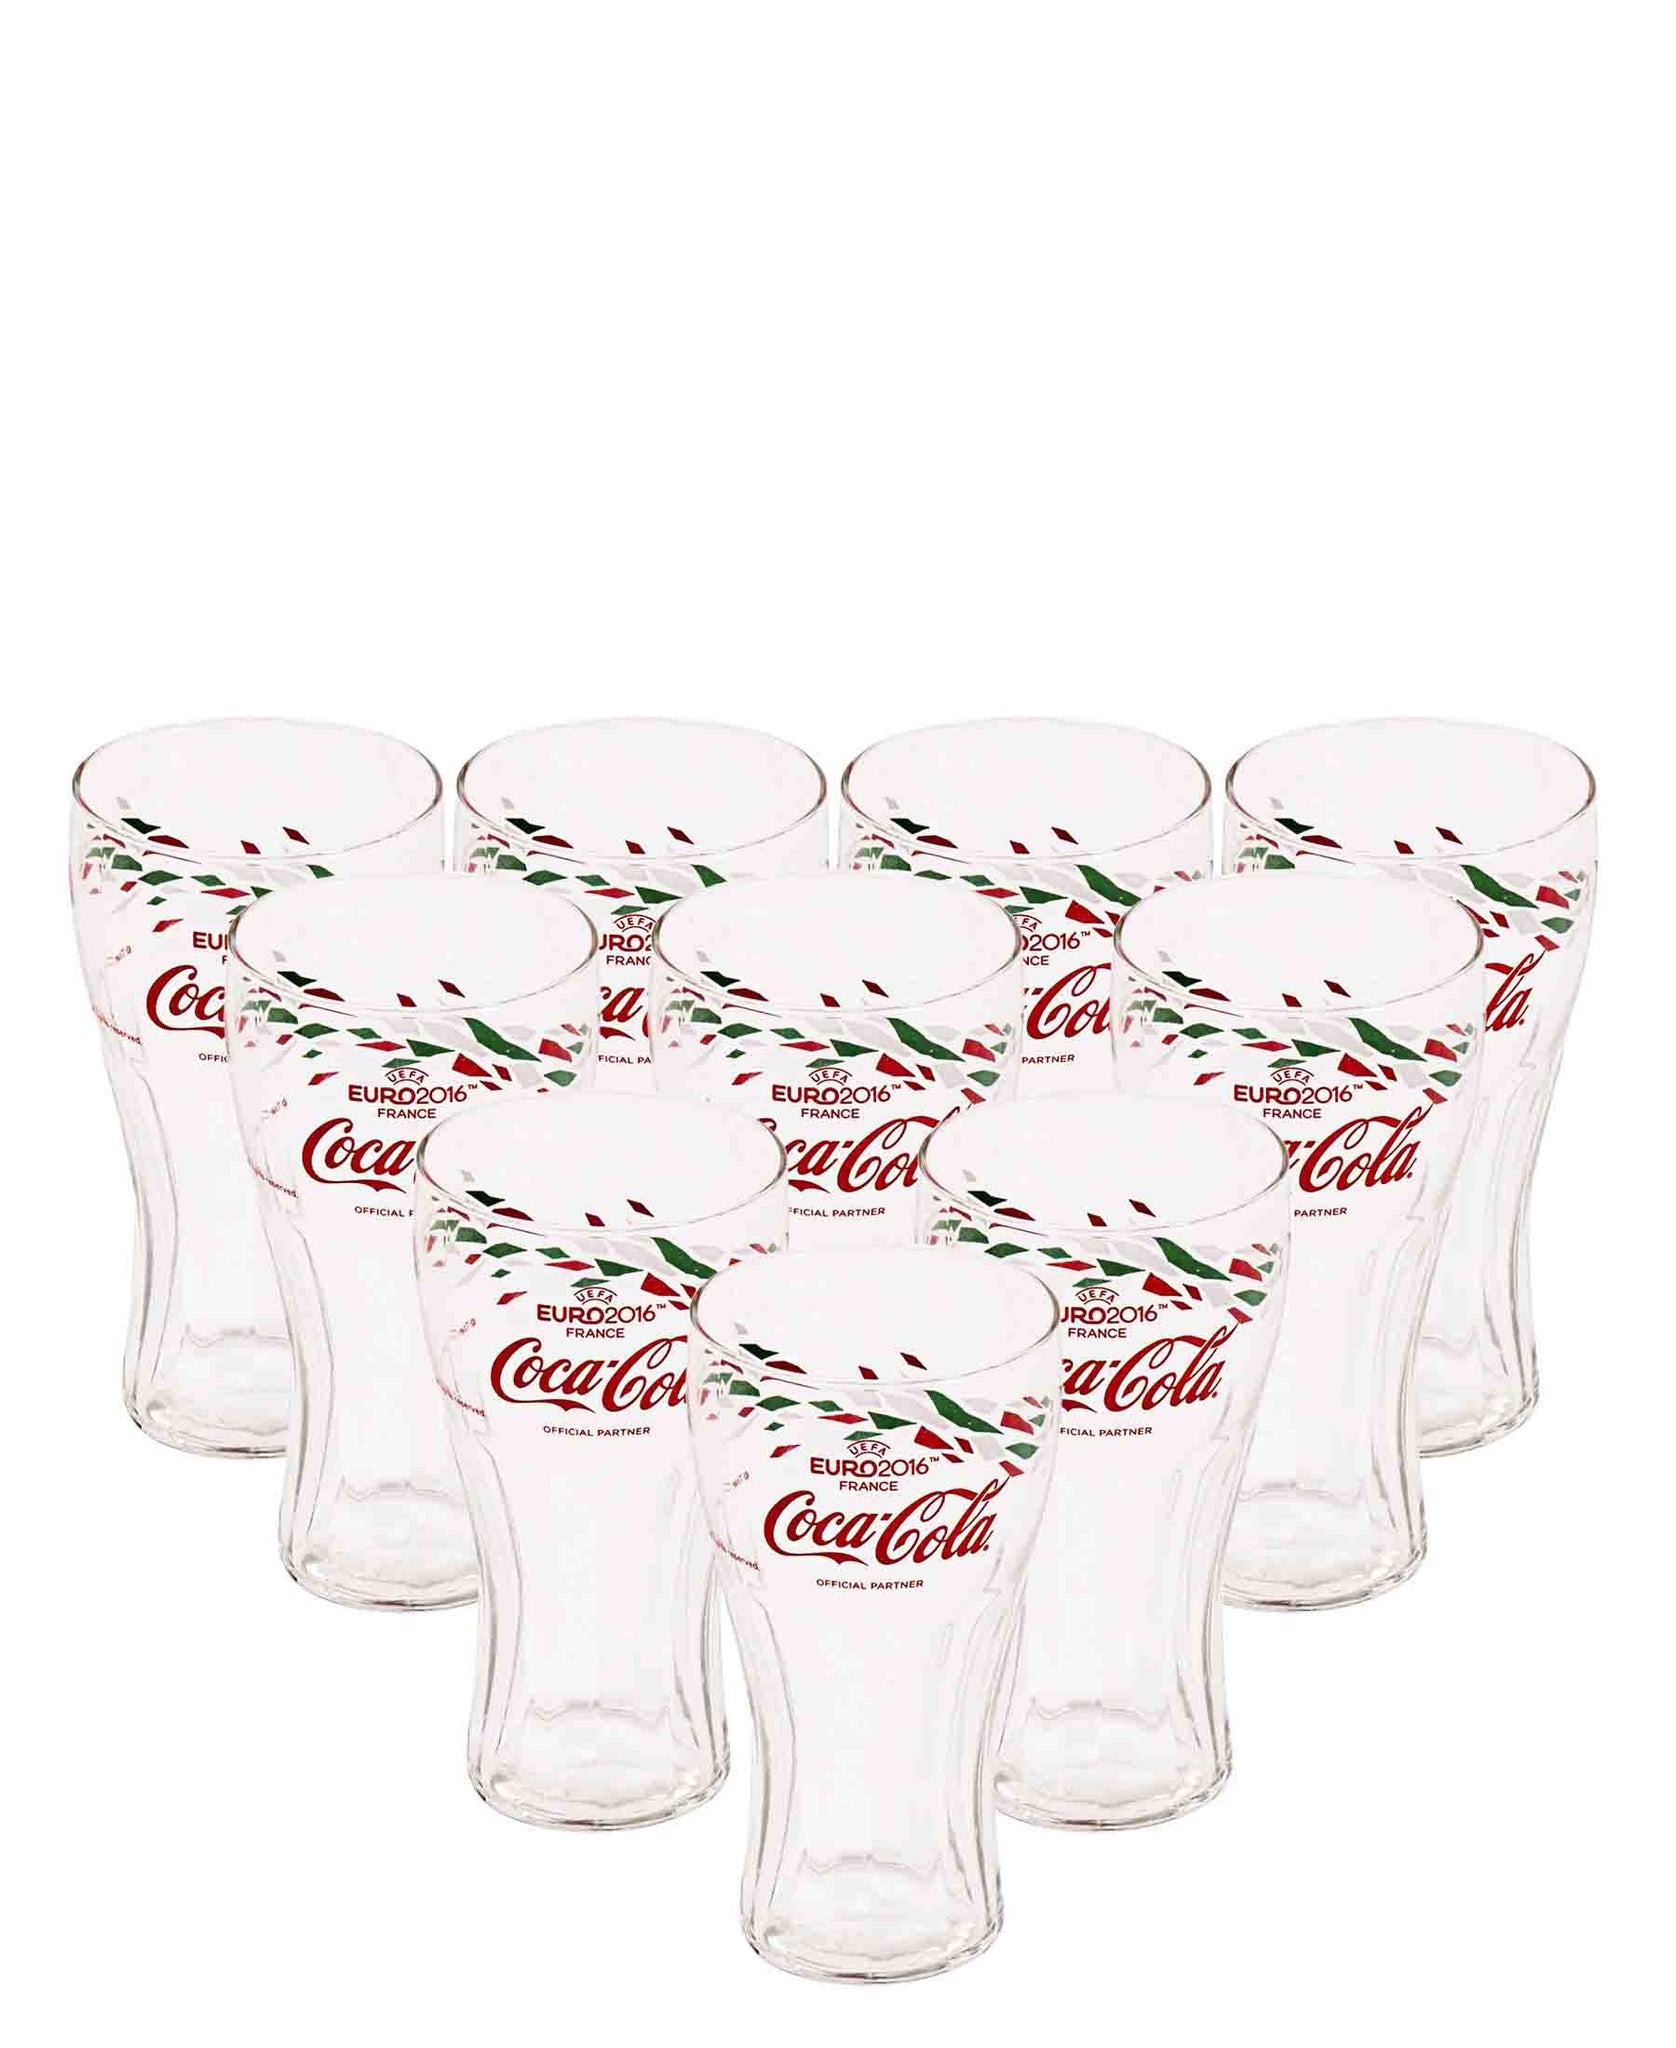 Retro Uefa 2016 France Glass 10 Piece - Clear With Pattern